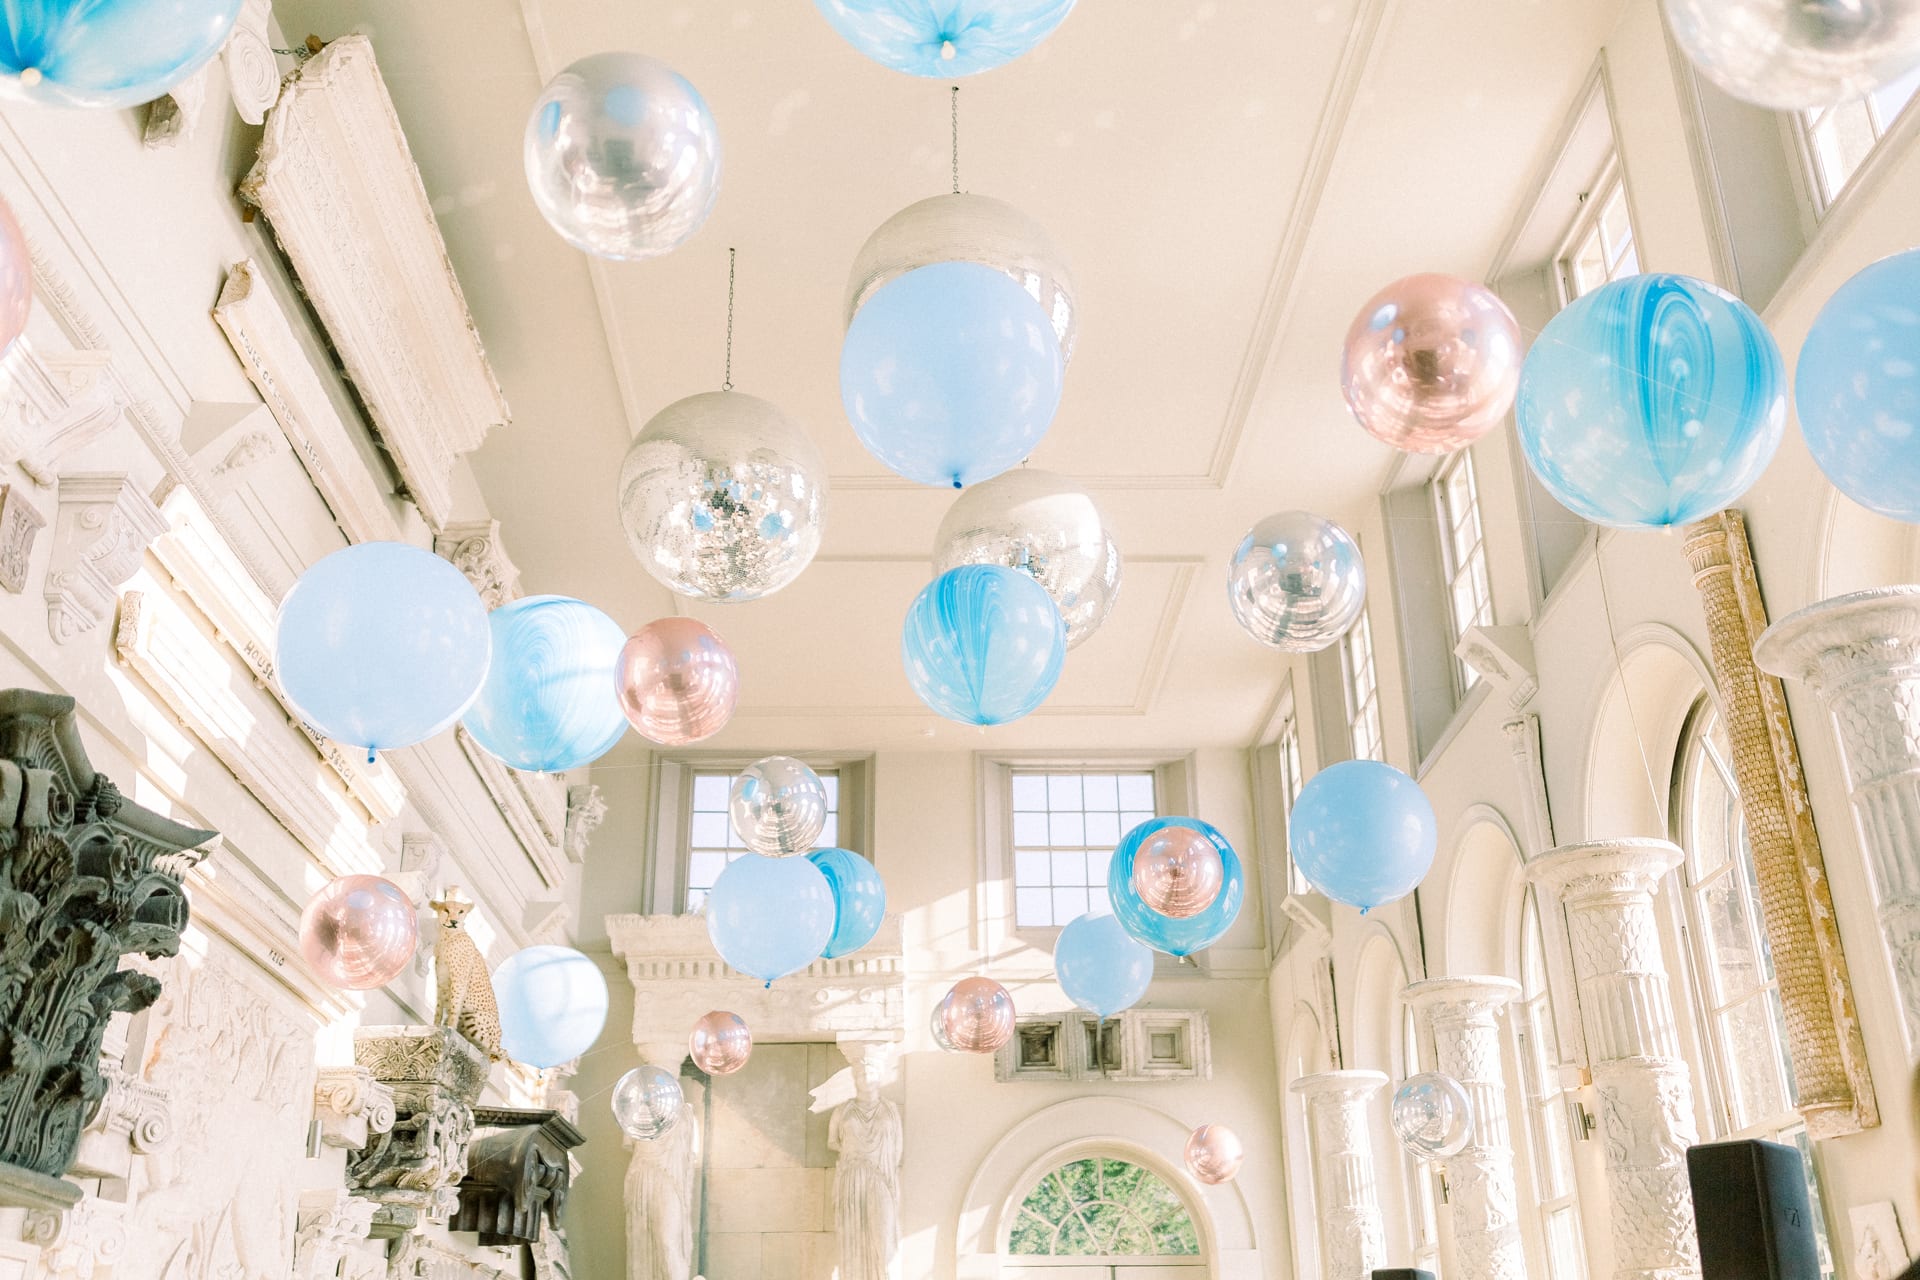 Bubblegum balloons floating from the ceiling pale blue